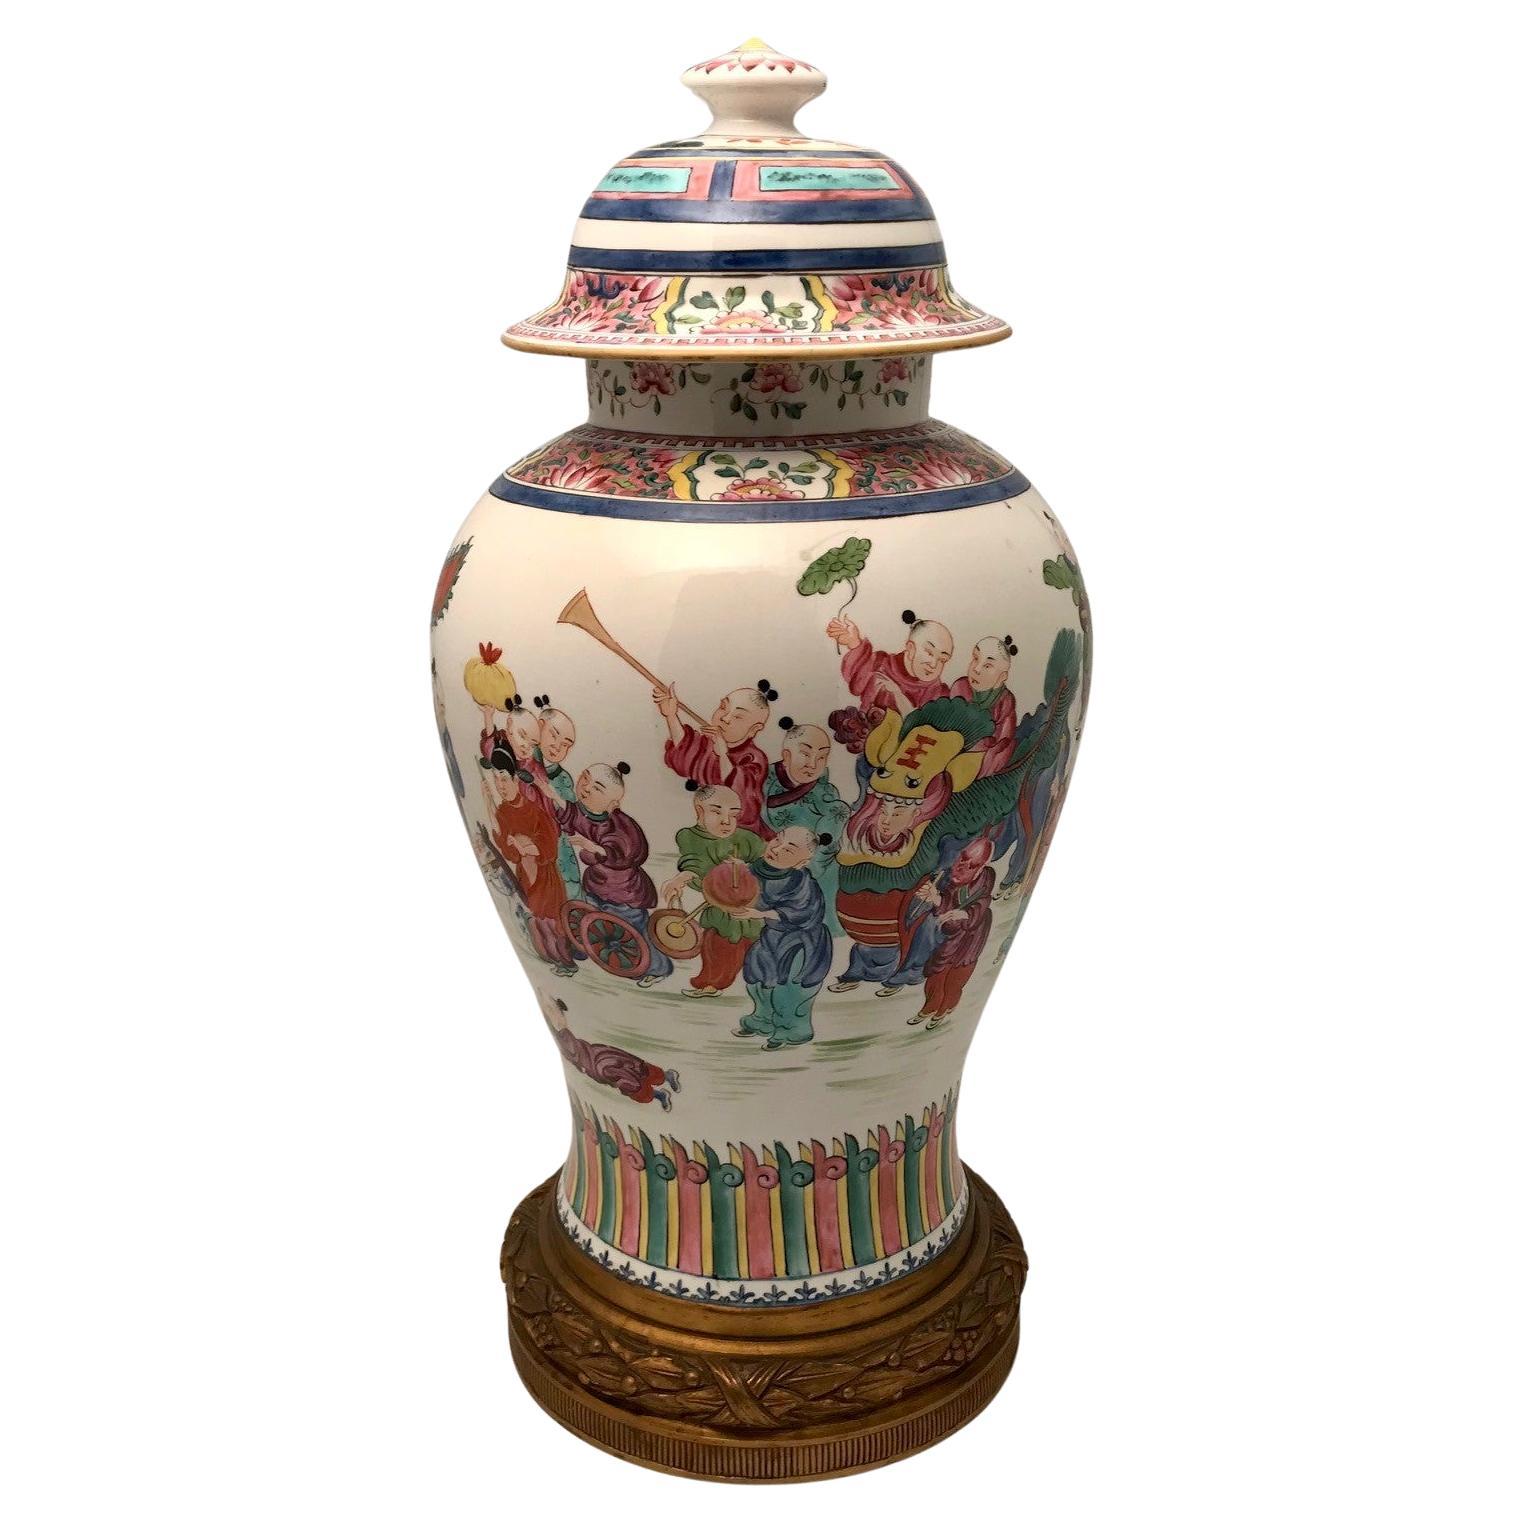 This Baluster vase is charmingly painted in polychrome with a procession, children playing, with adults playing musical instruments, riding on a cart and with a dragon. The overall feel is festive. and playful..